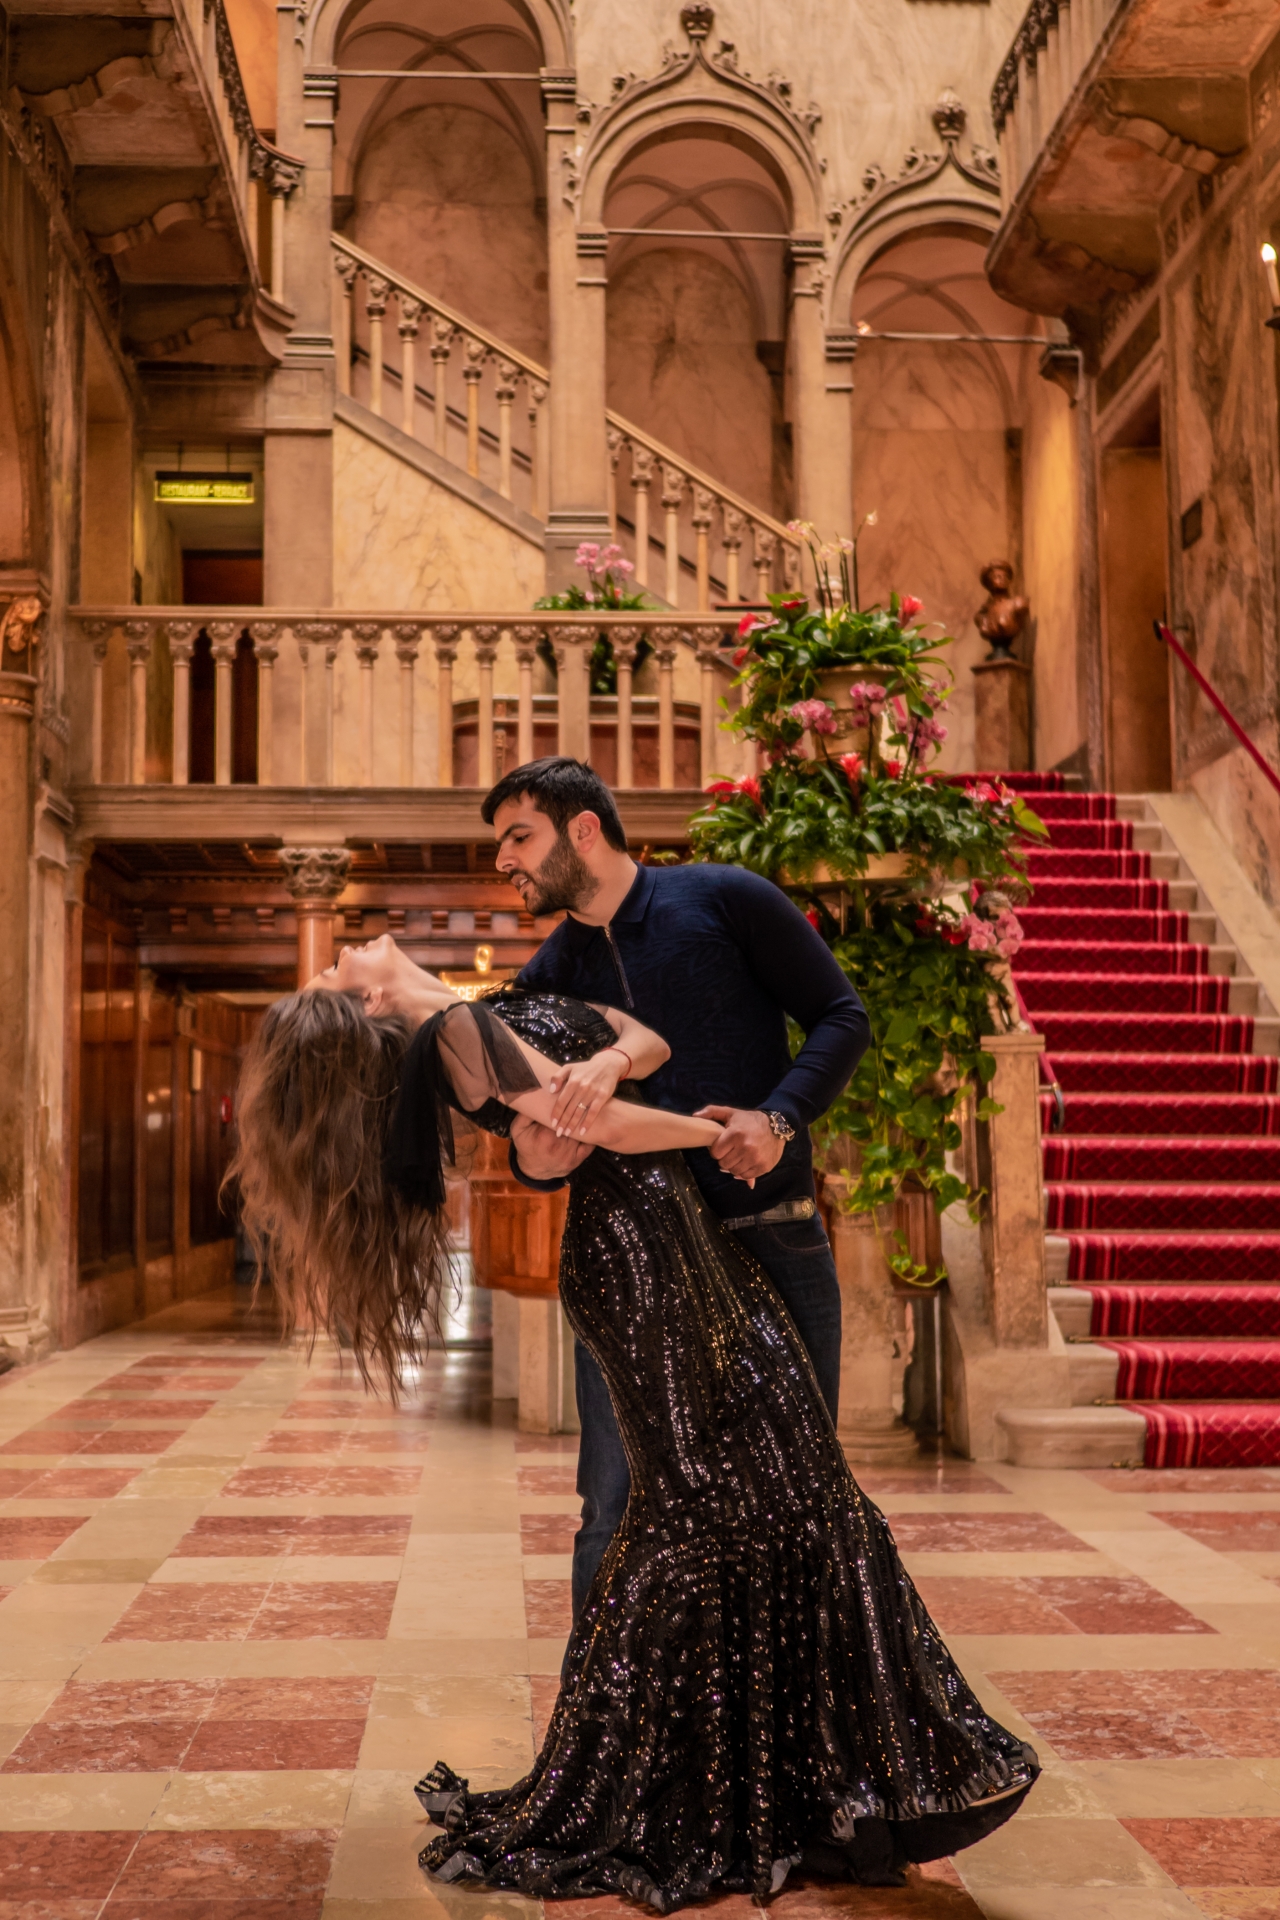 ﻿Armenian engagement photoshoot in Venice and in the church 